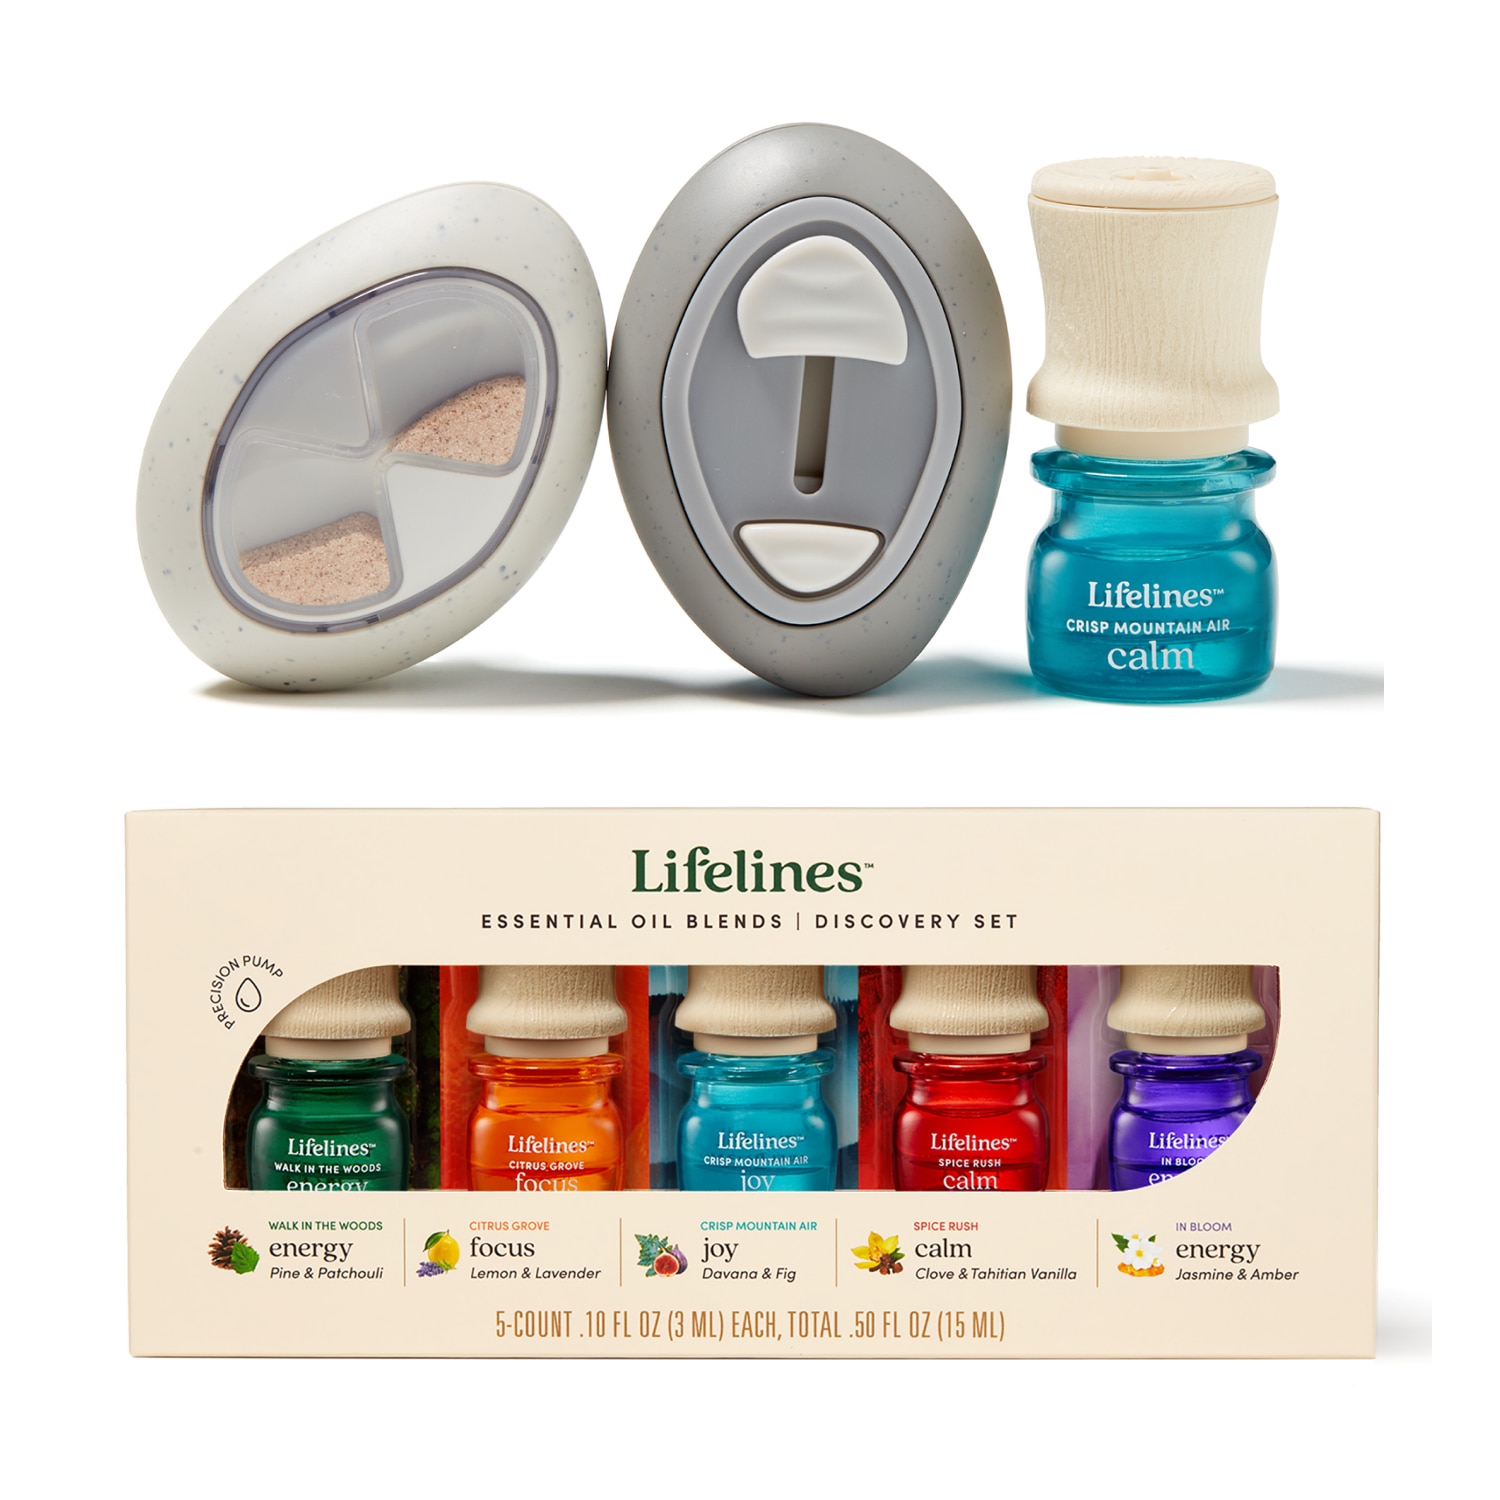 Lifelines "Channel Your Energy" Bundle - Motion Fidget Grounding Stones and Essential Oil Blend Discovery Set